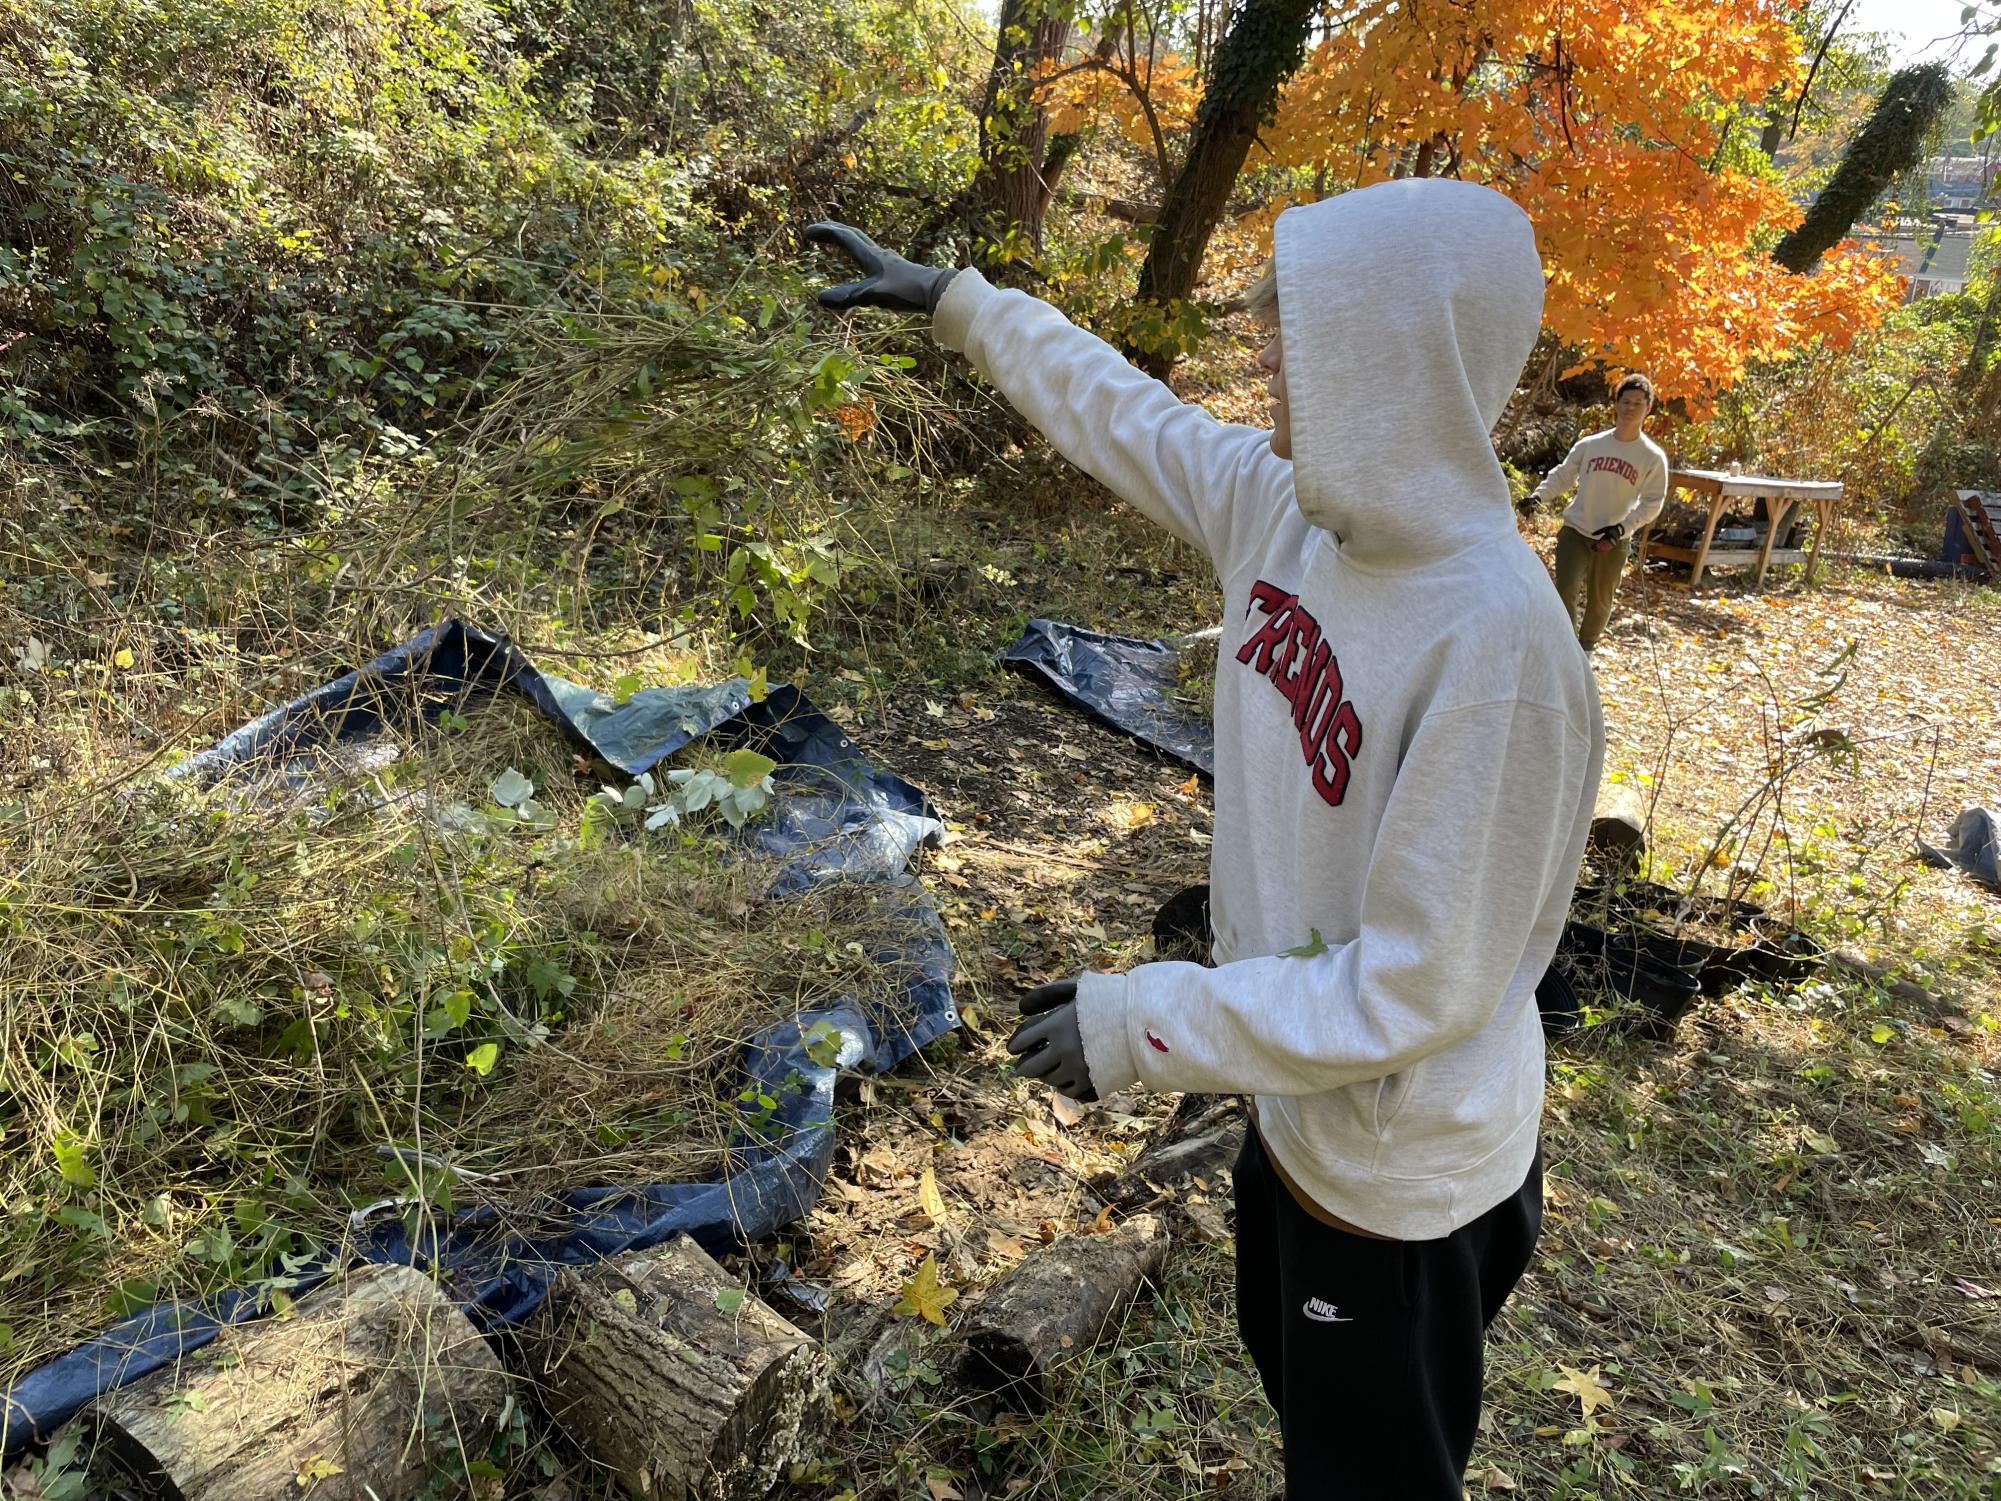 Friends School of Baltimore 10th grader Jacob Batho disposes of weeds as part of an effort to clear out an area to plant new, better plants in Stillmeadow Peace Park.